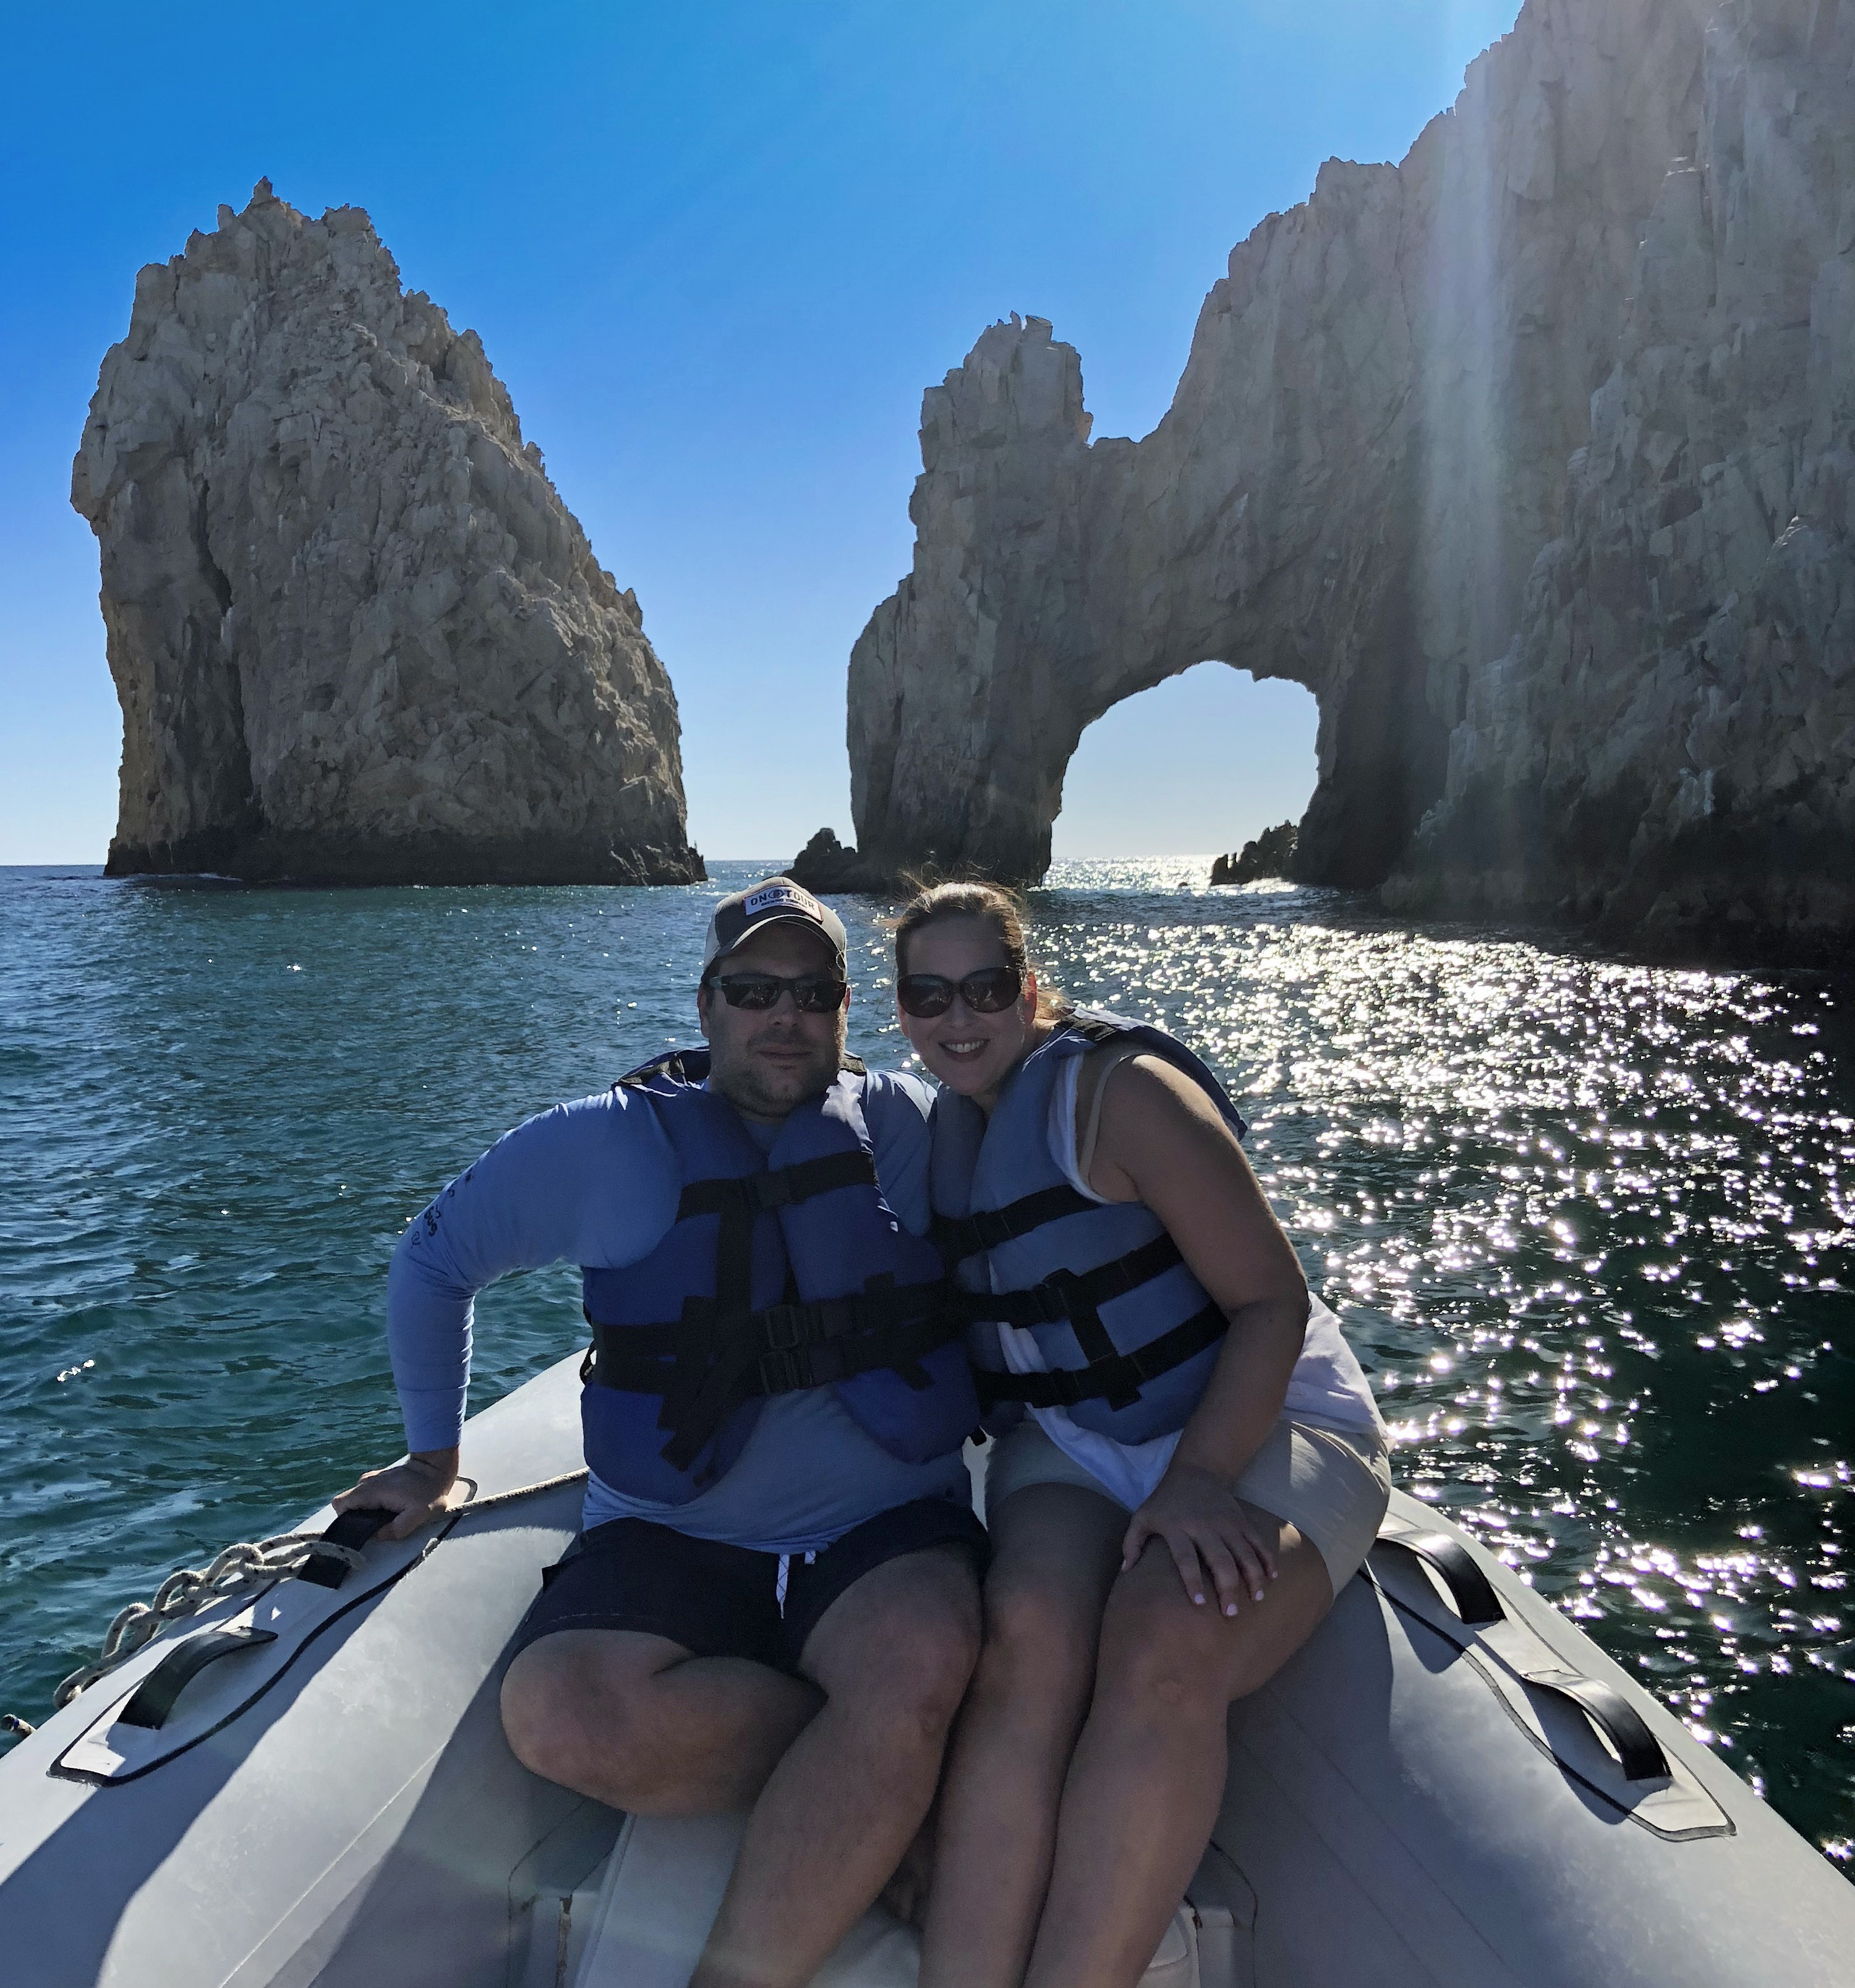 Whale Watching Los Cabos